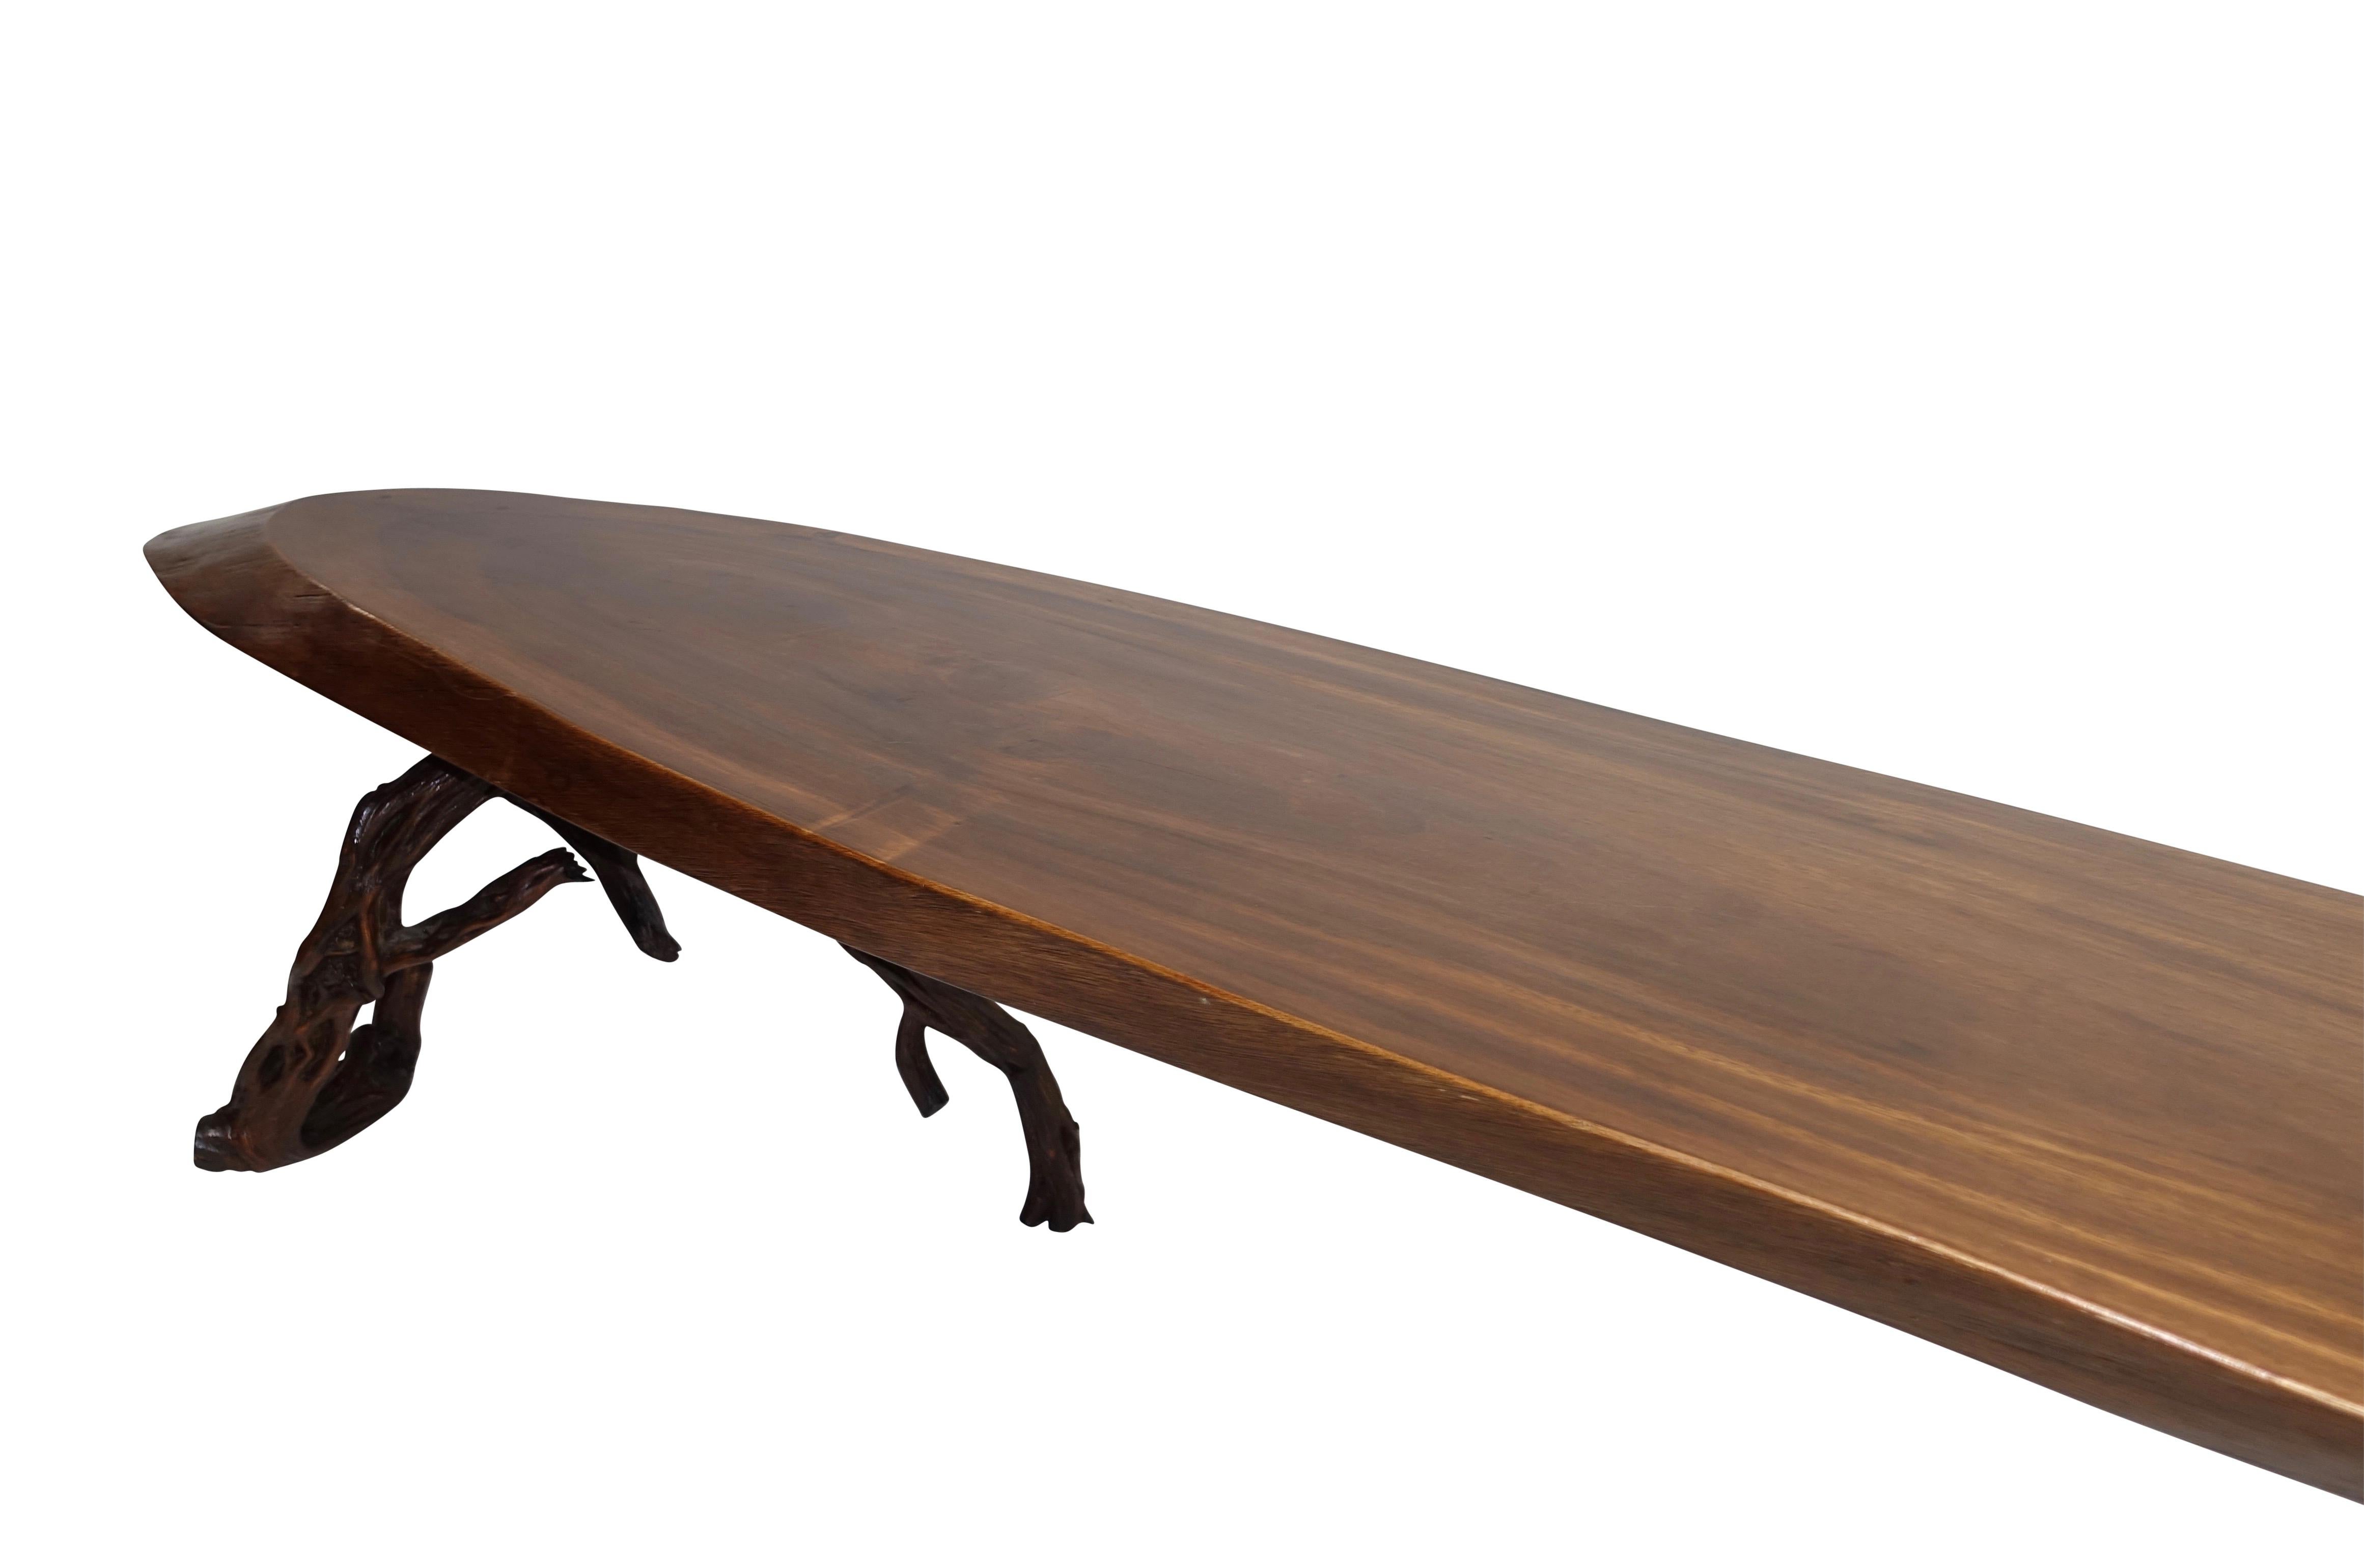 Large Walnut Slab Coffee Table, American, Mid-20th Century For Sale 2